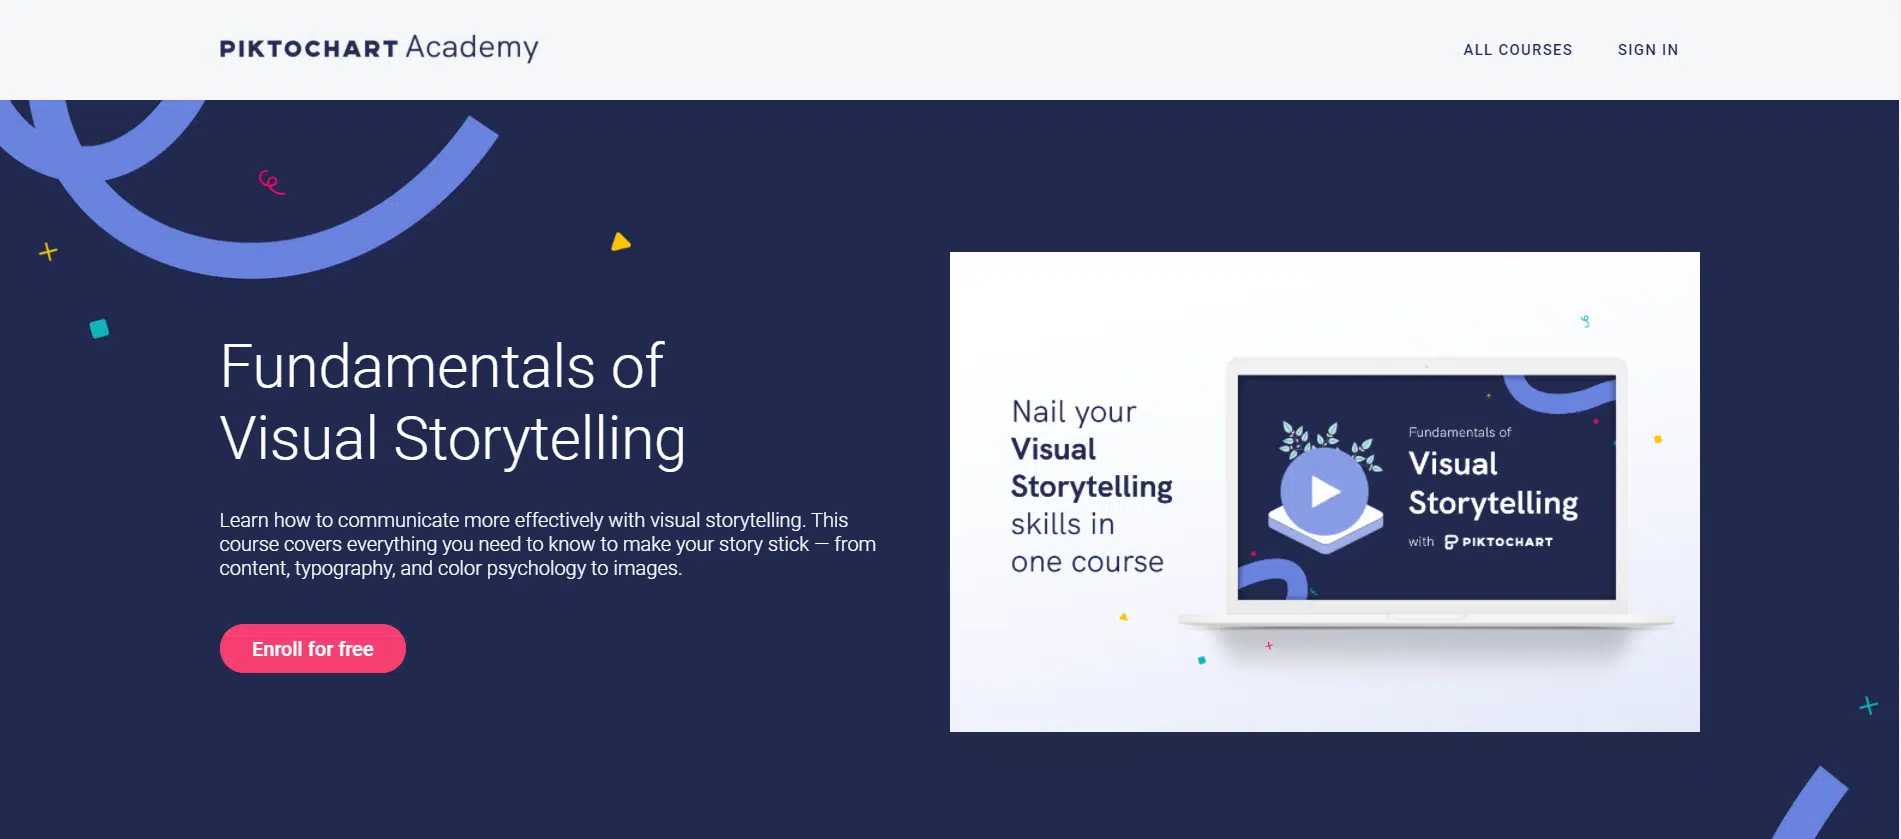 Fundamentals of Visual Storytelling Course on Piktochart 